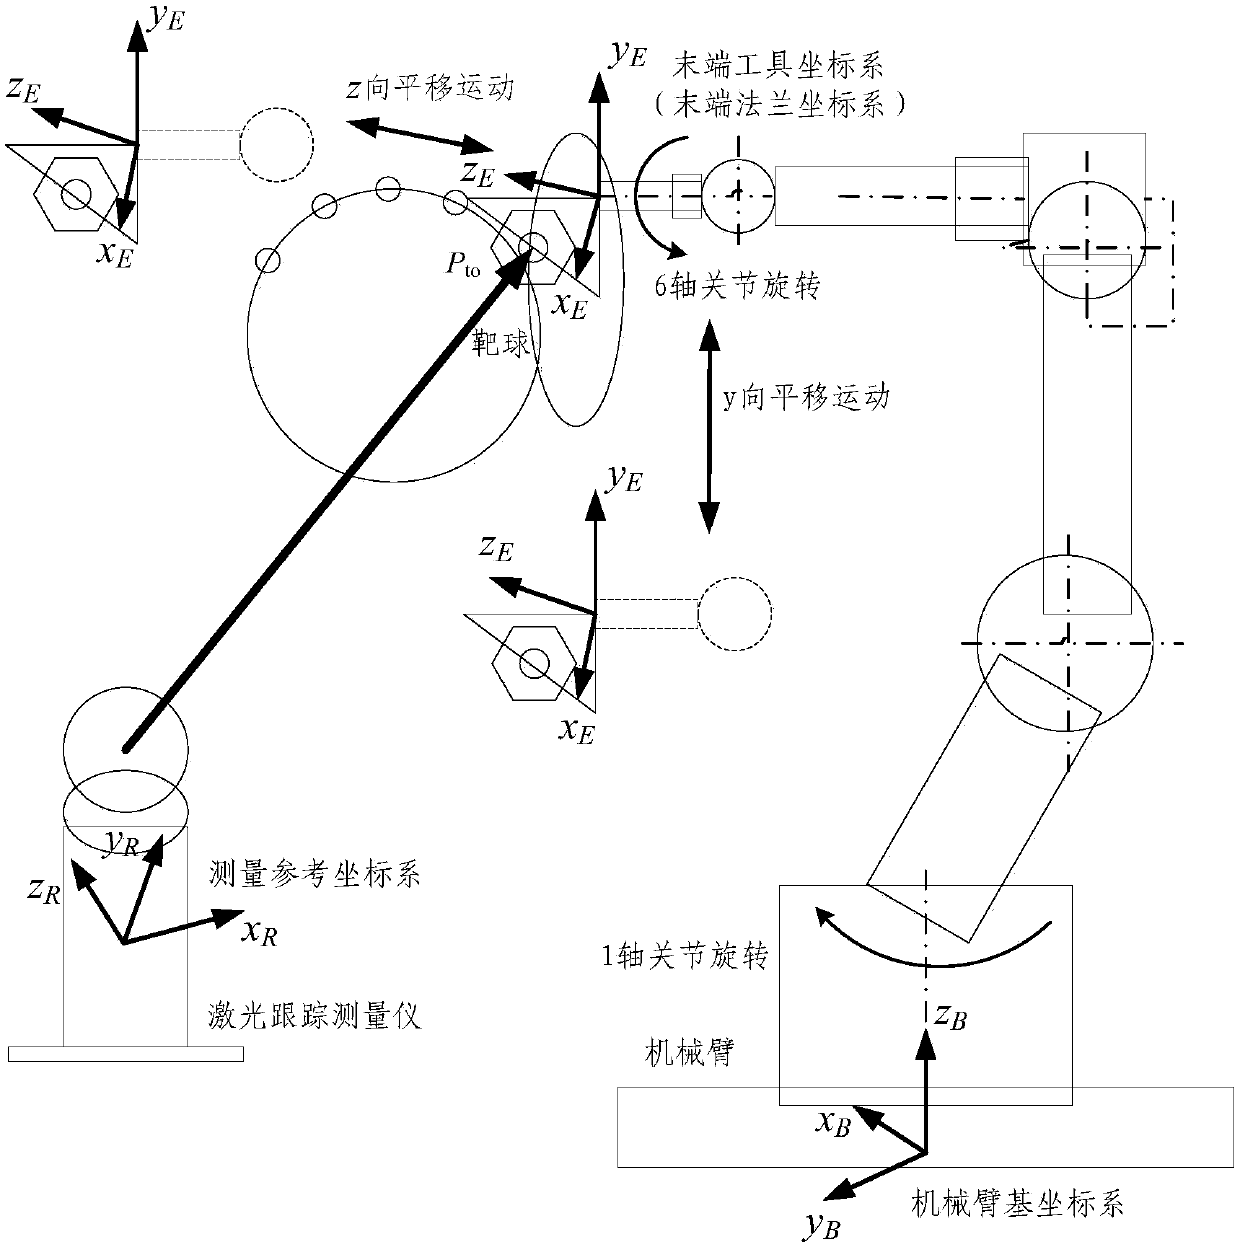 Transformation calibration method and system for mechanical arm coordinate system